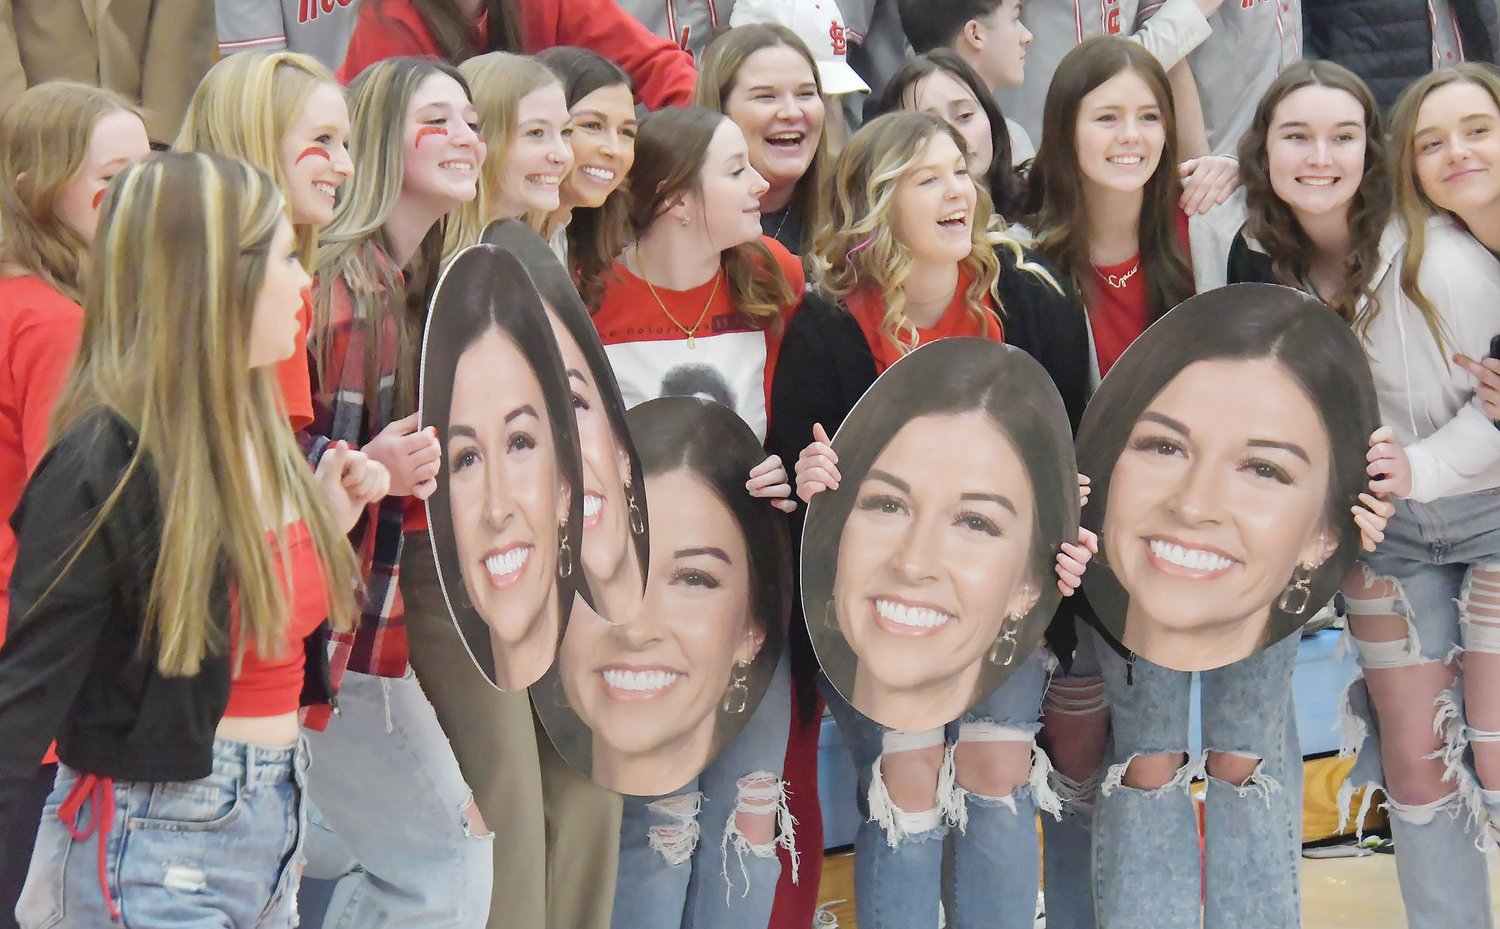 Moberly Area Community College head women's basketball coach Hana Haden is surrounded by members of the Greyhound softball team, who made "Fatheads" out of the coach's image.